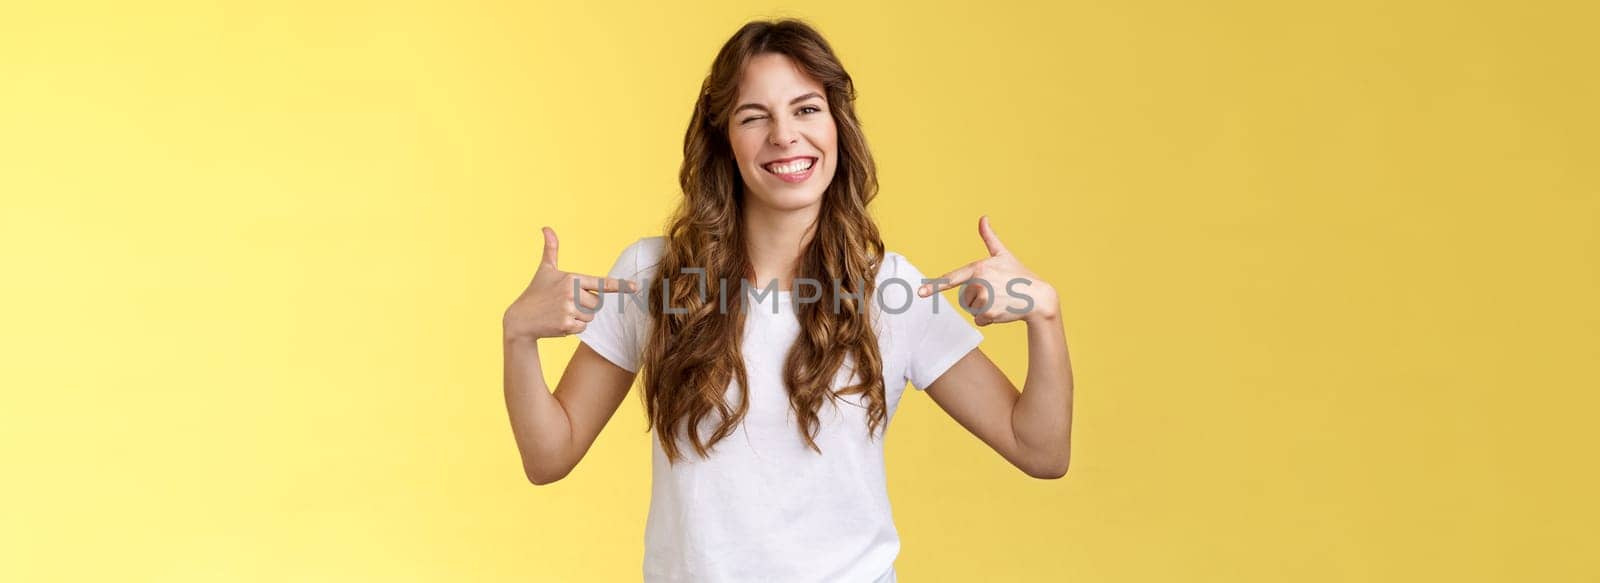 You would not regret this. Sassy good-looking outgoing daring young woman pointing center copy space indicating herself winking joyfully show perfect candidature stand yellow background.